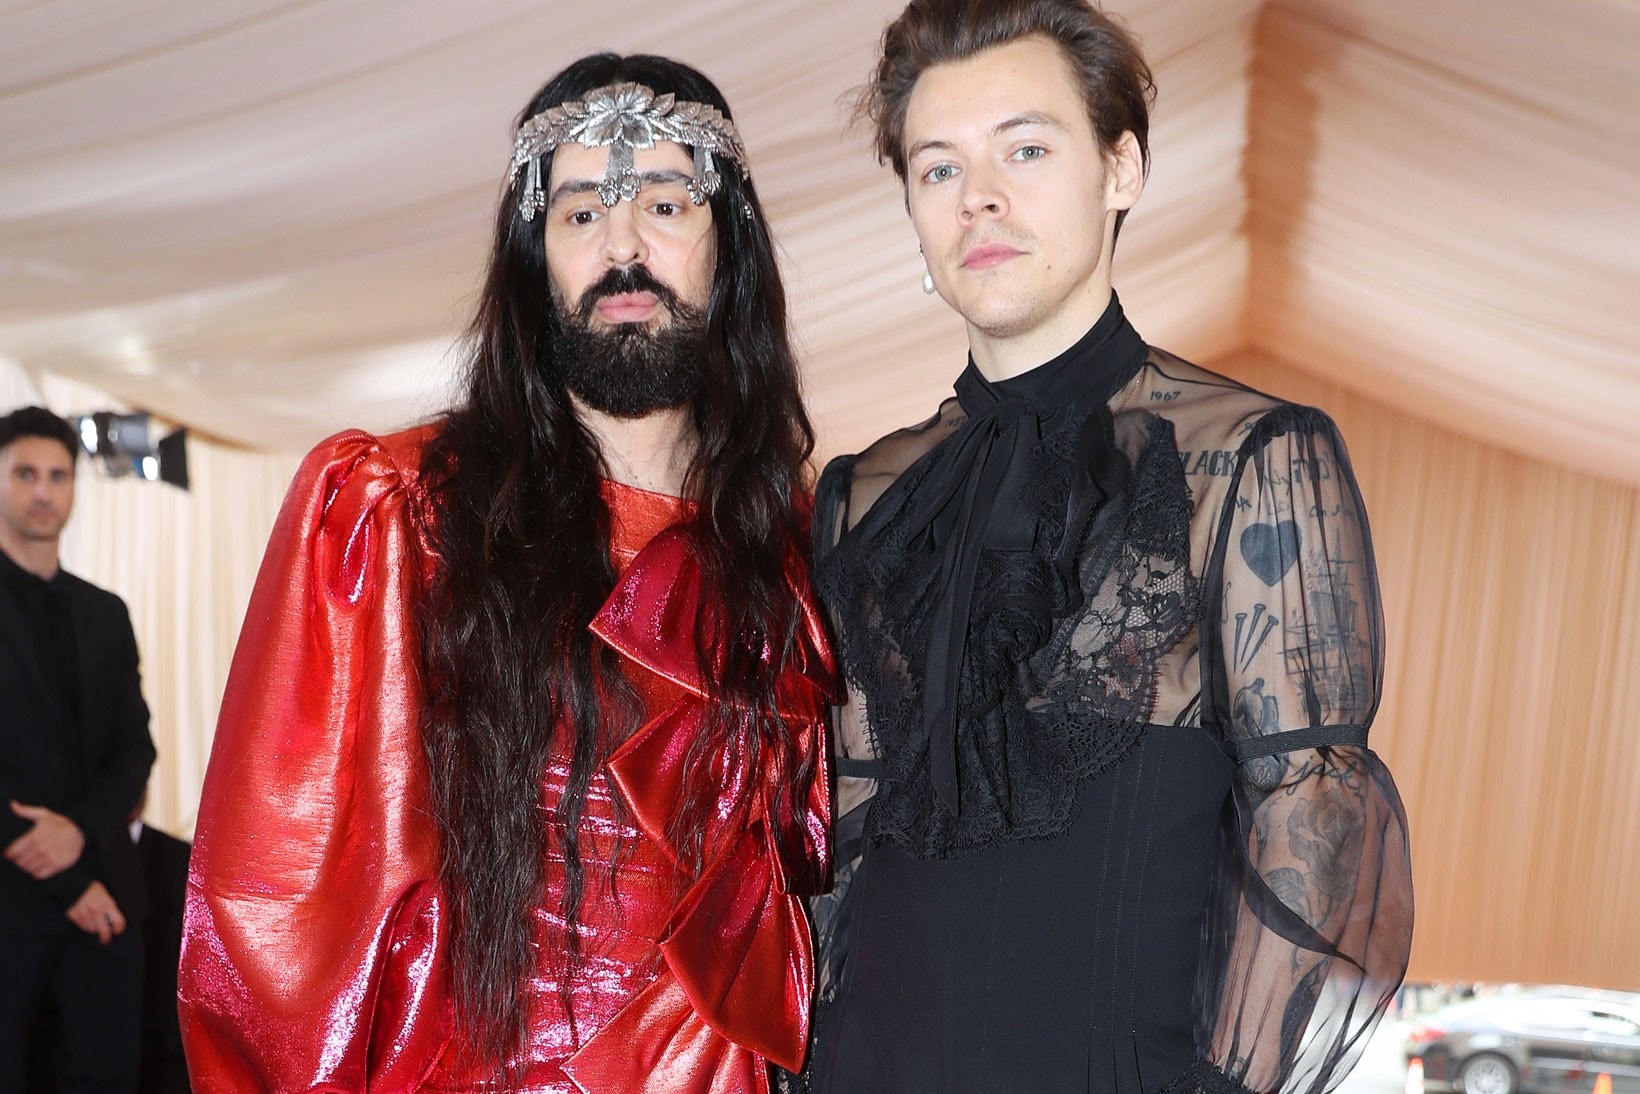 Harry Styles & Alessandro Michele 'Fine Line' Tee exclusive collaboration gucci music albums where to purchase buy